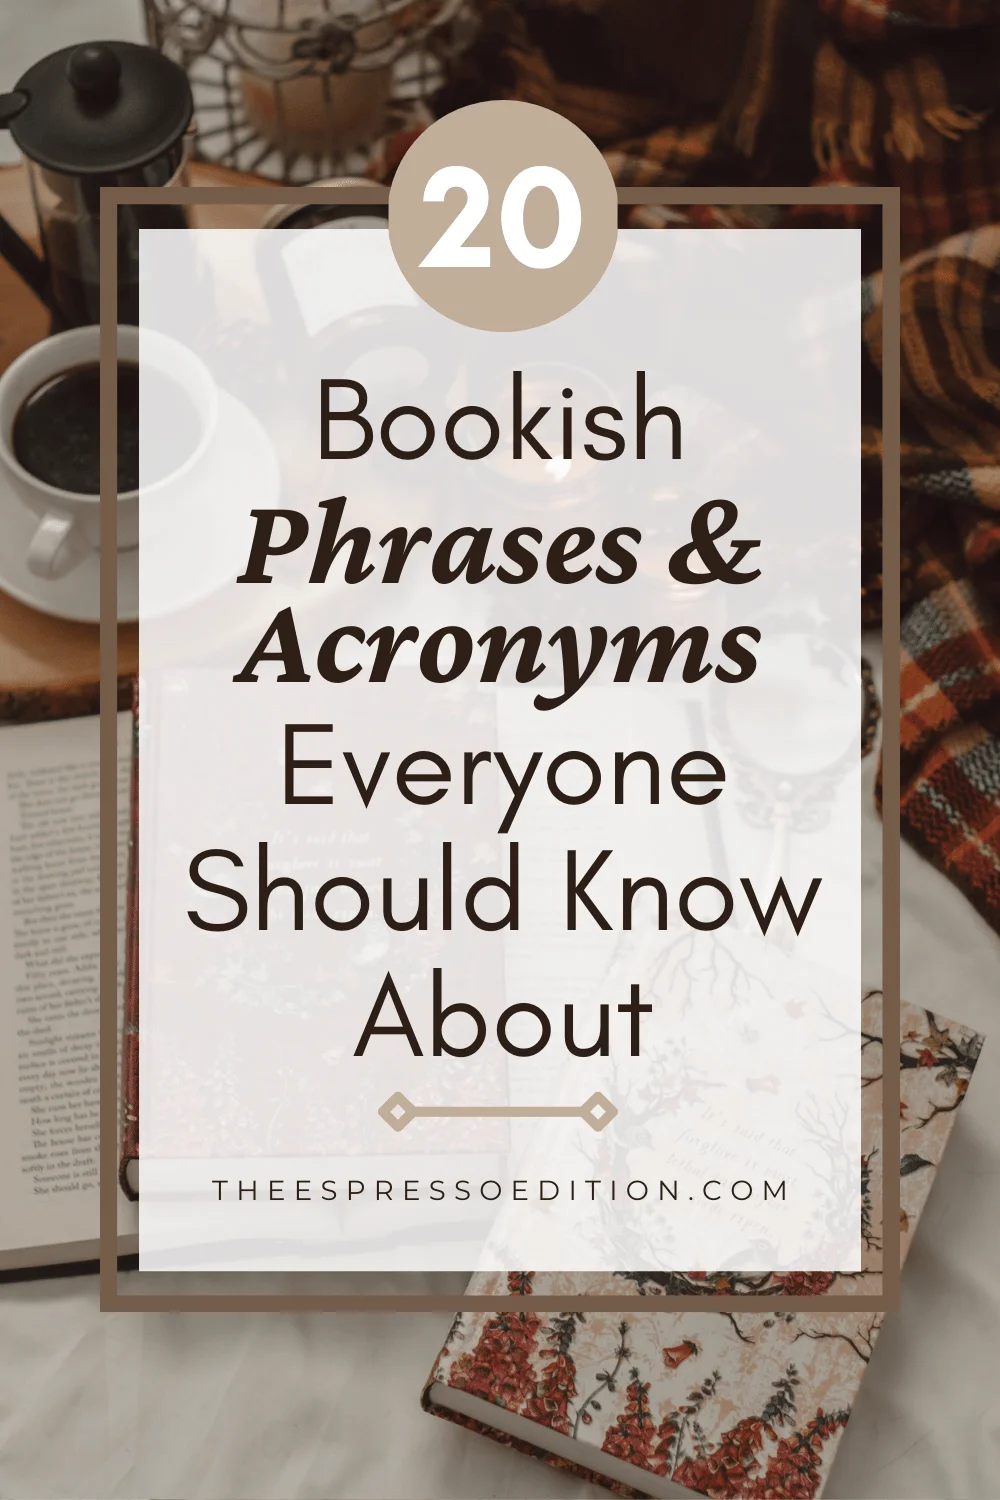 20 Bookish Phrases and Acronyms Everyone Should Know About by The Espresso Edition cozy bookish blog